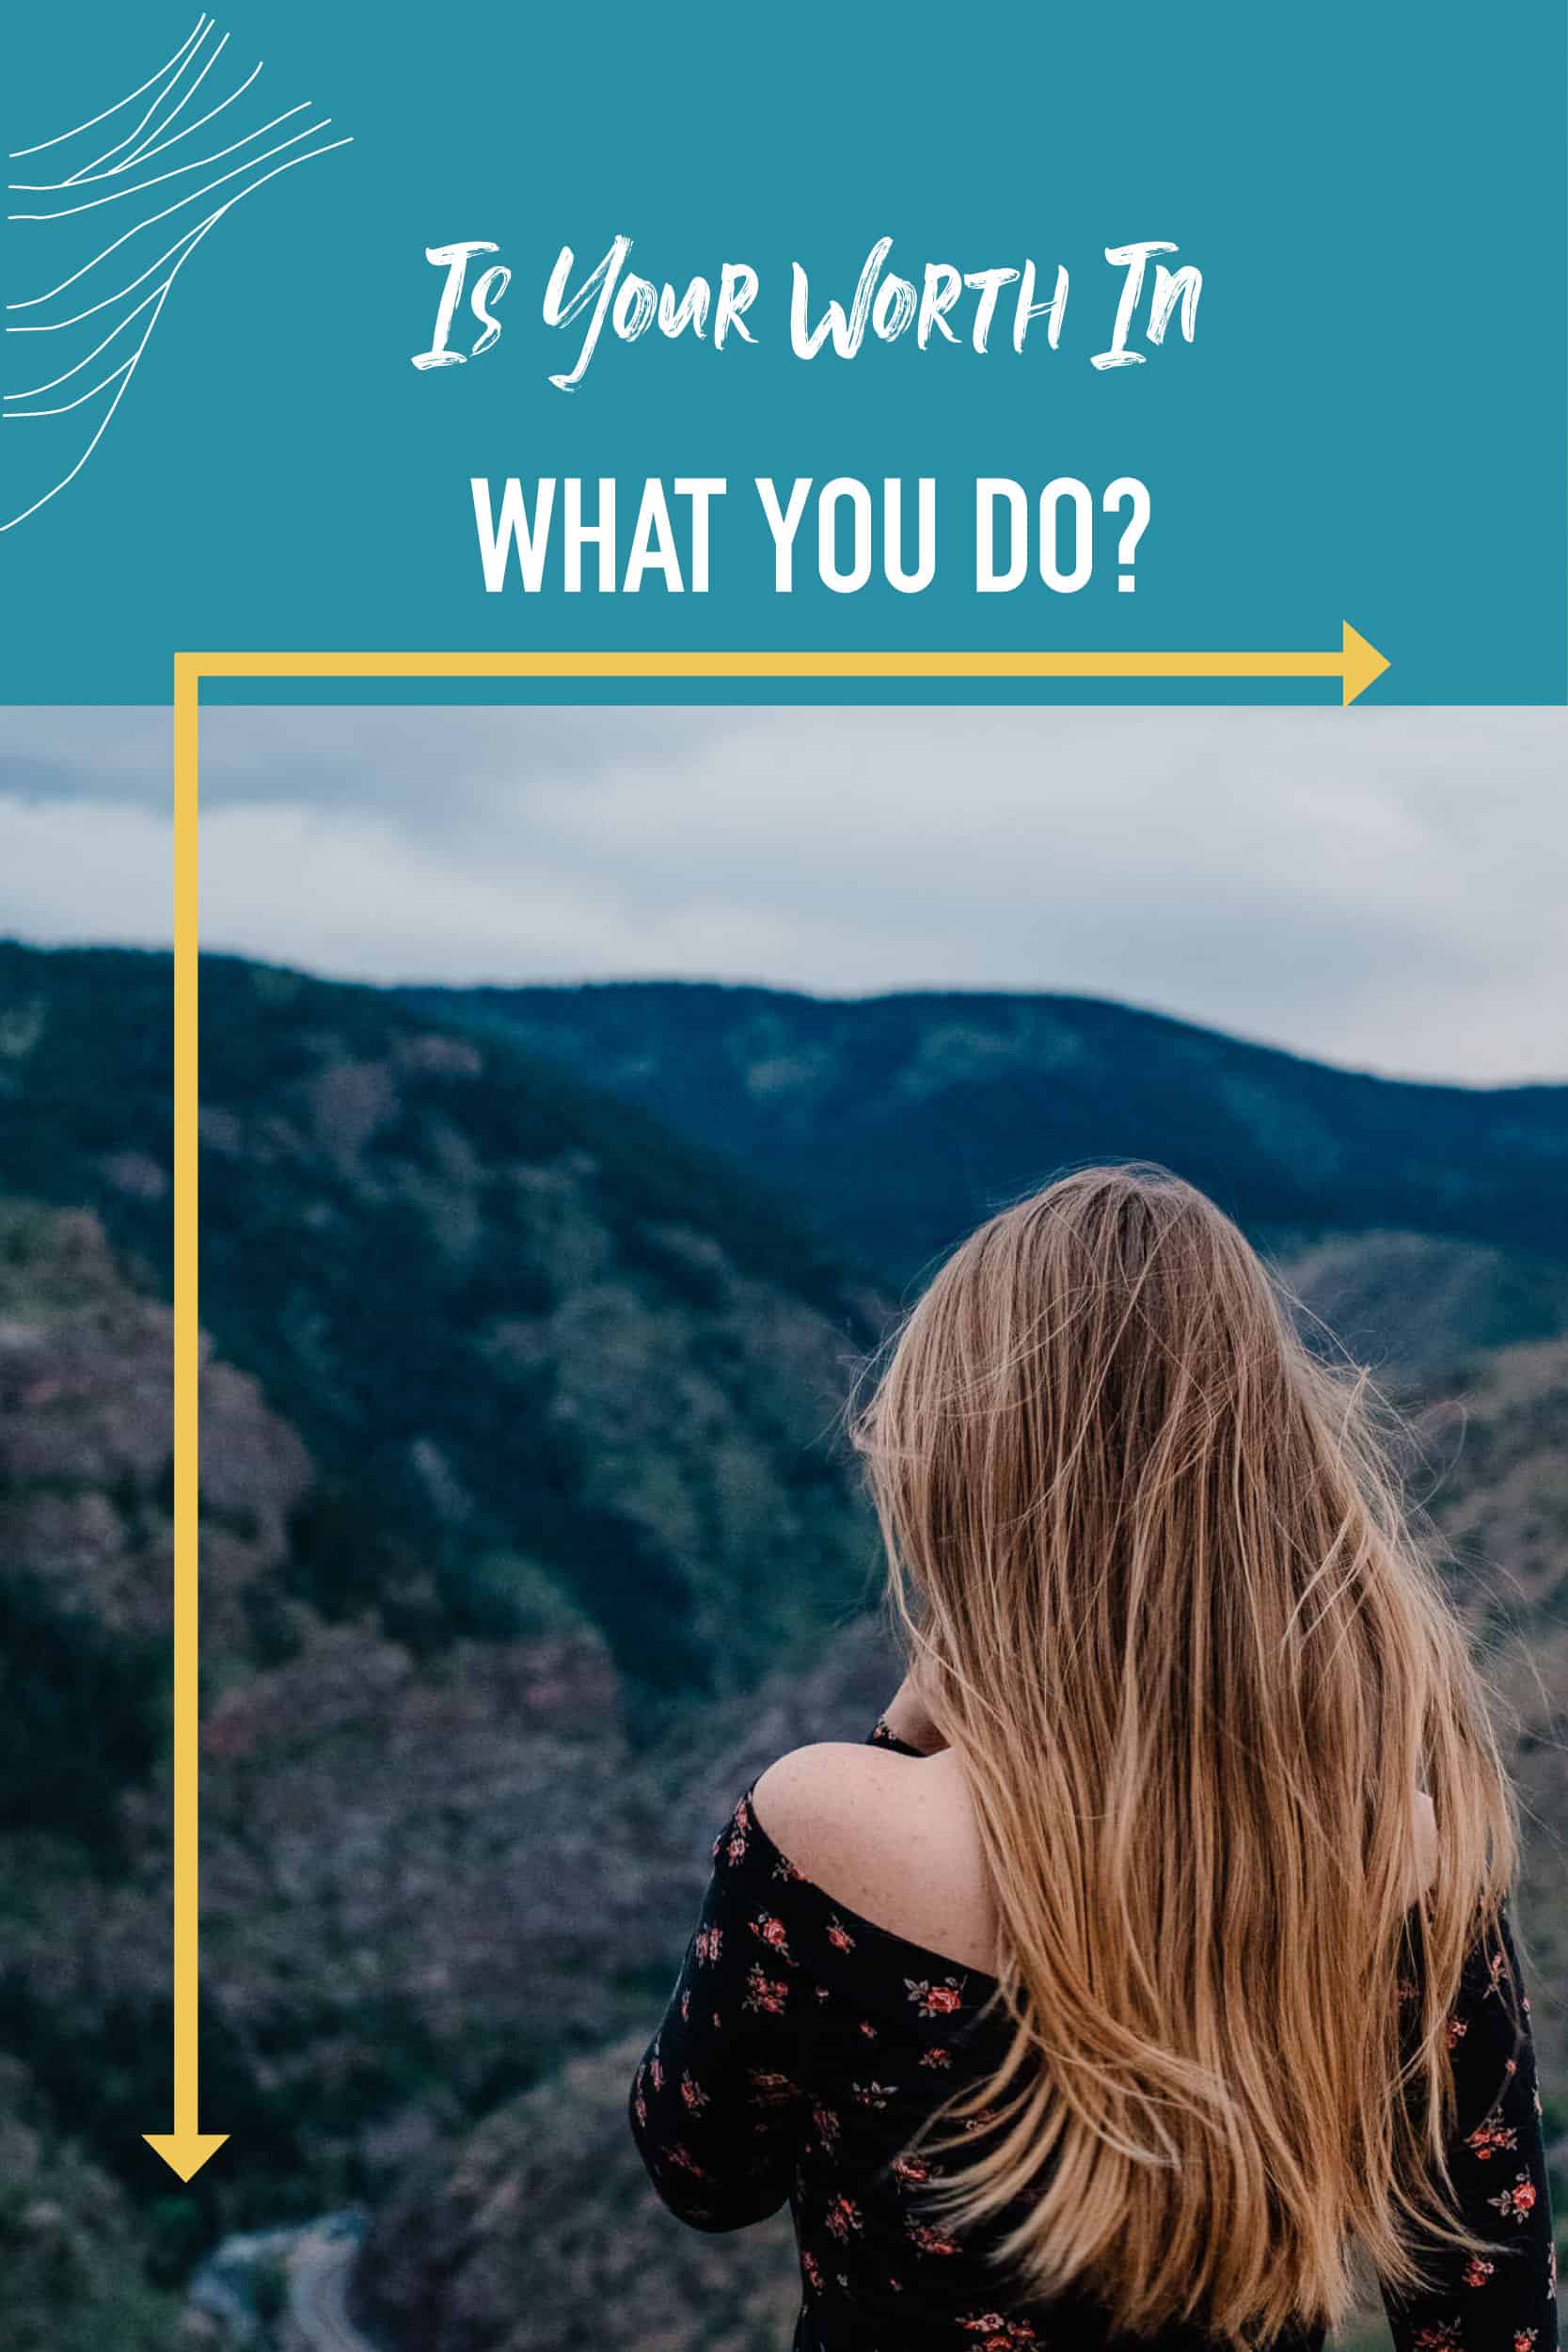 "is your self worth in what you do" view of female over looking mountain with blue background under text and yellow arrows